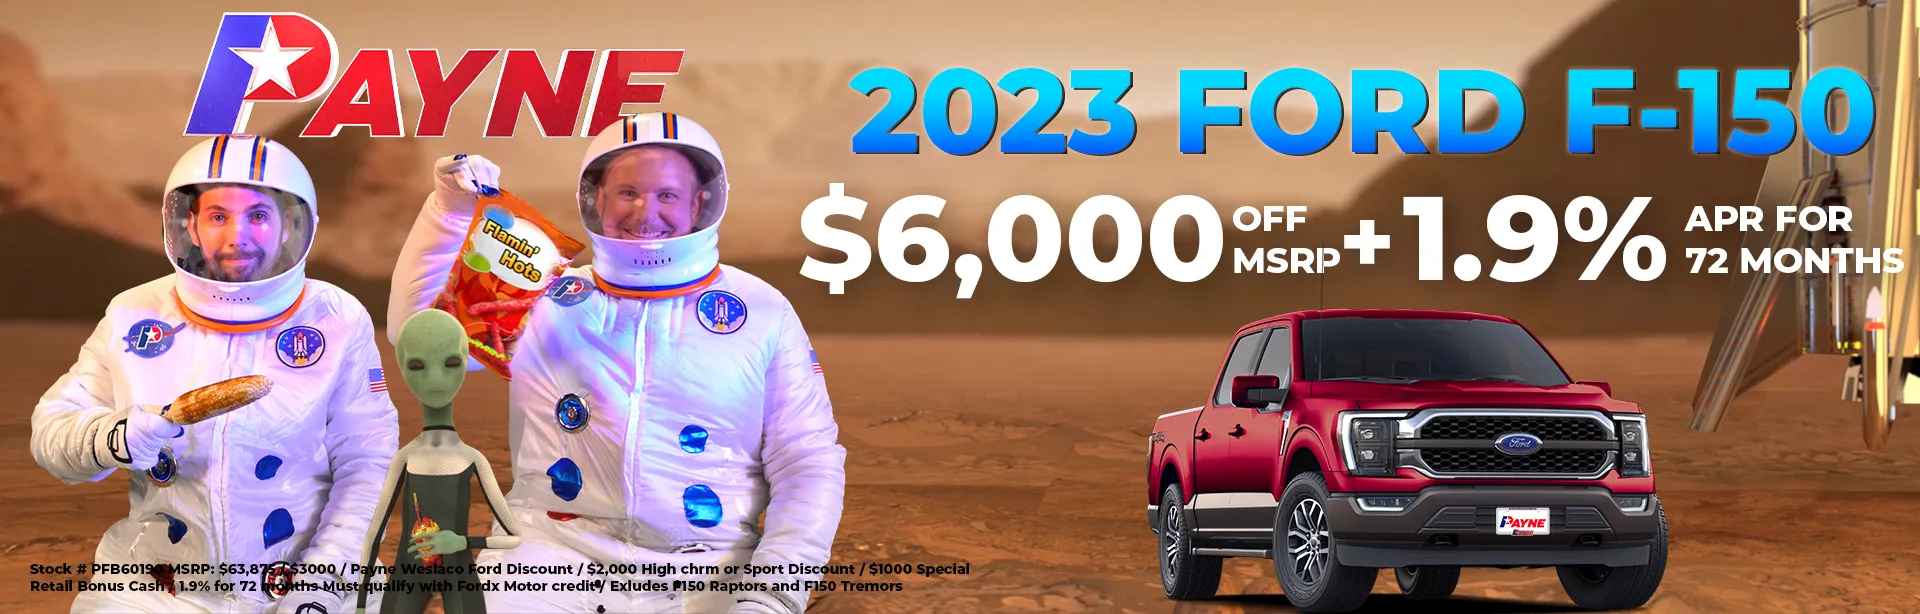 2023 Ford F150 $6000 OFF MSRP + 1.9% APR for 72 Months 